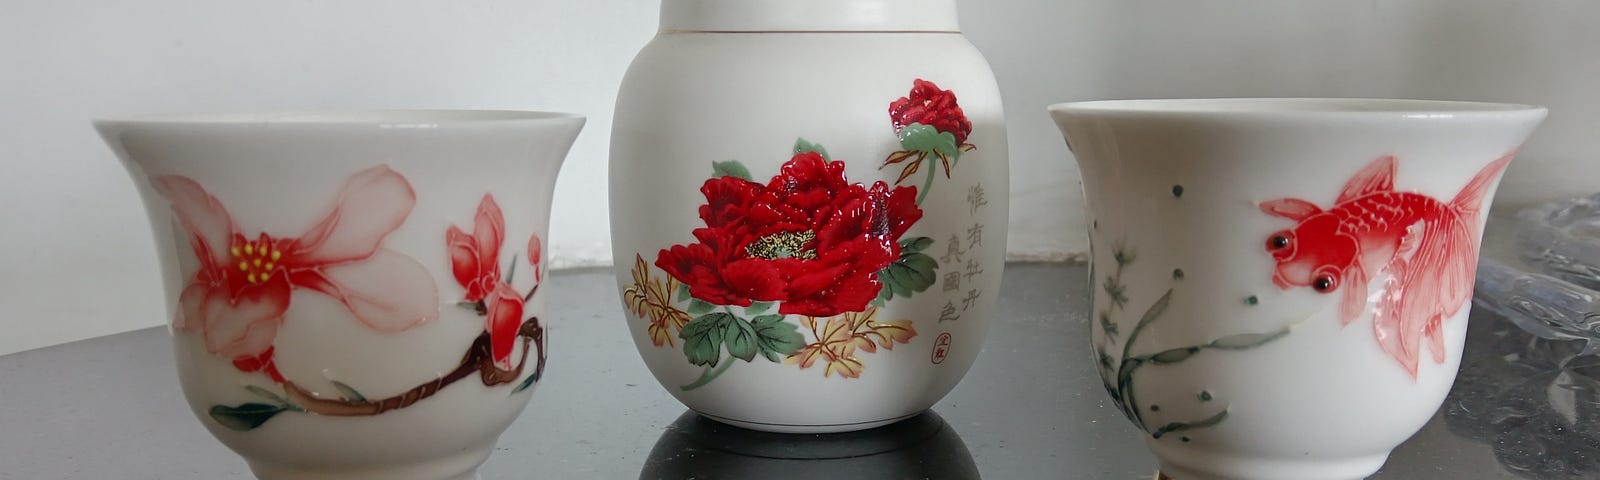 2 Fine China tea cups embellished with a flower and a goldfish beside a flowered Chinese tea caddy.